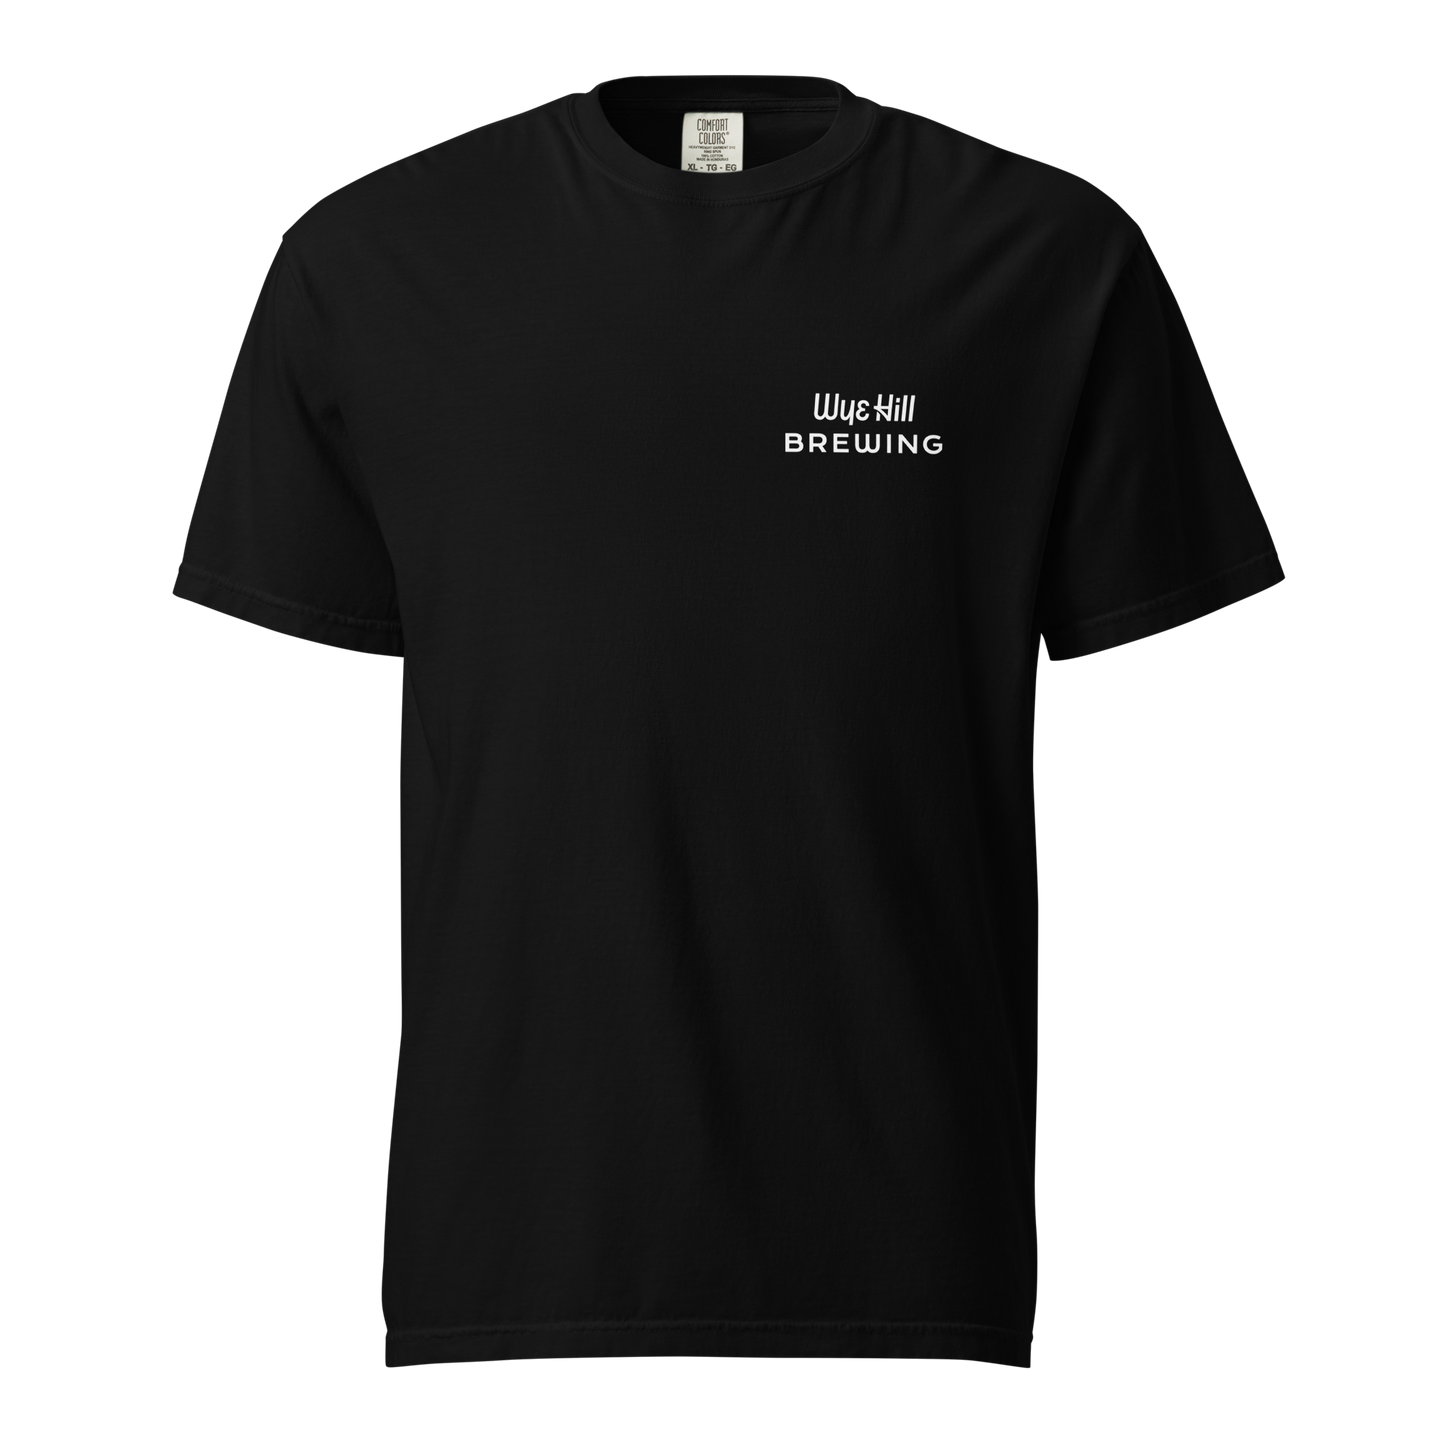 Wye Hill Brewing [Unisex Basic Tee] - Comfort Colors